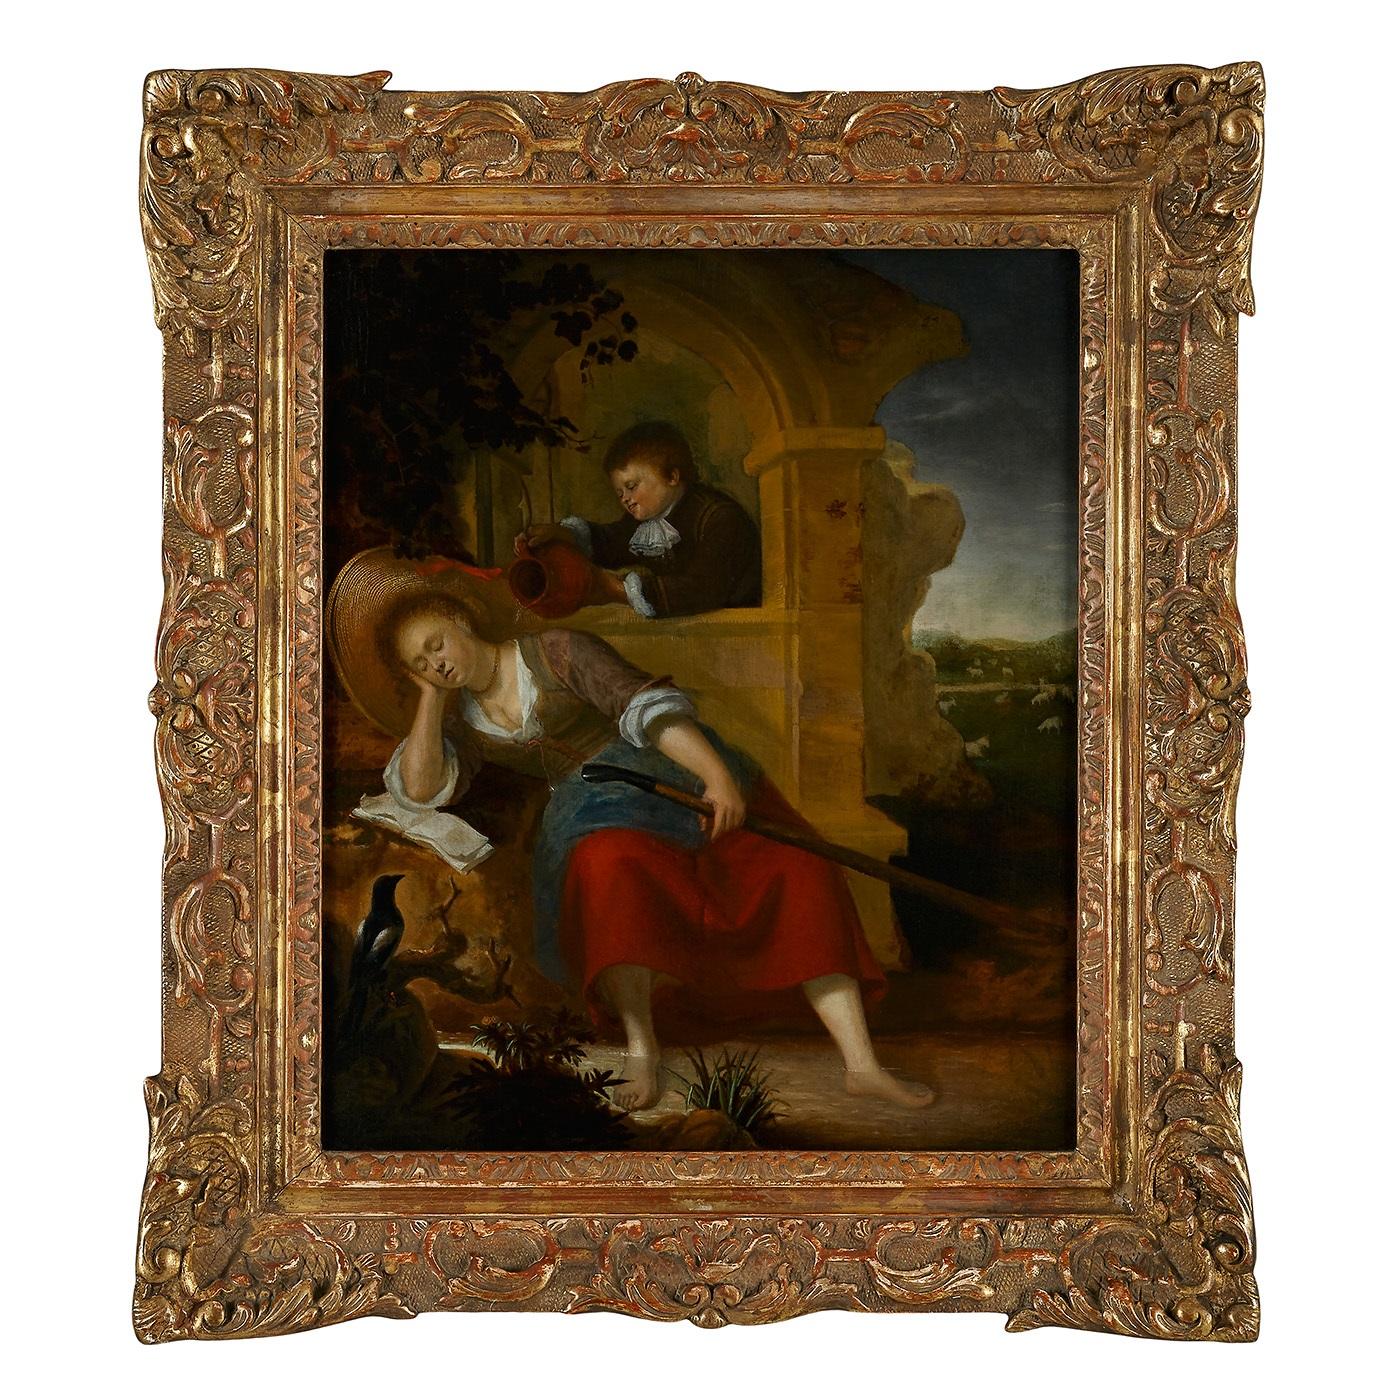 Bartholomeus Maton Figurative Painting - Dutch Old Master painting of a young Shepherdess sleeping with a Boy teasing her